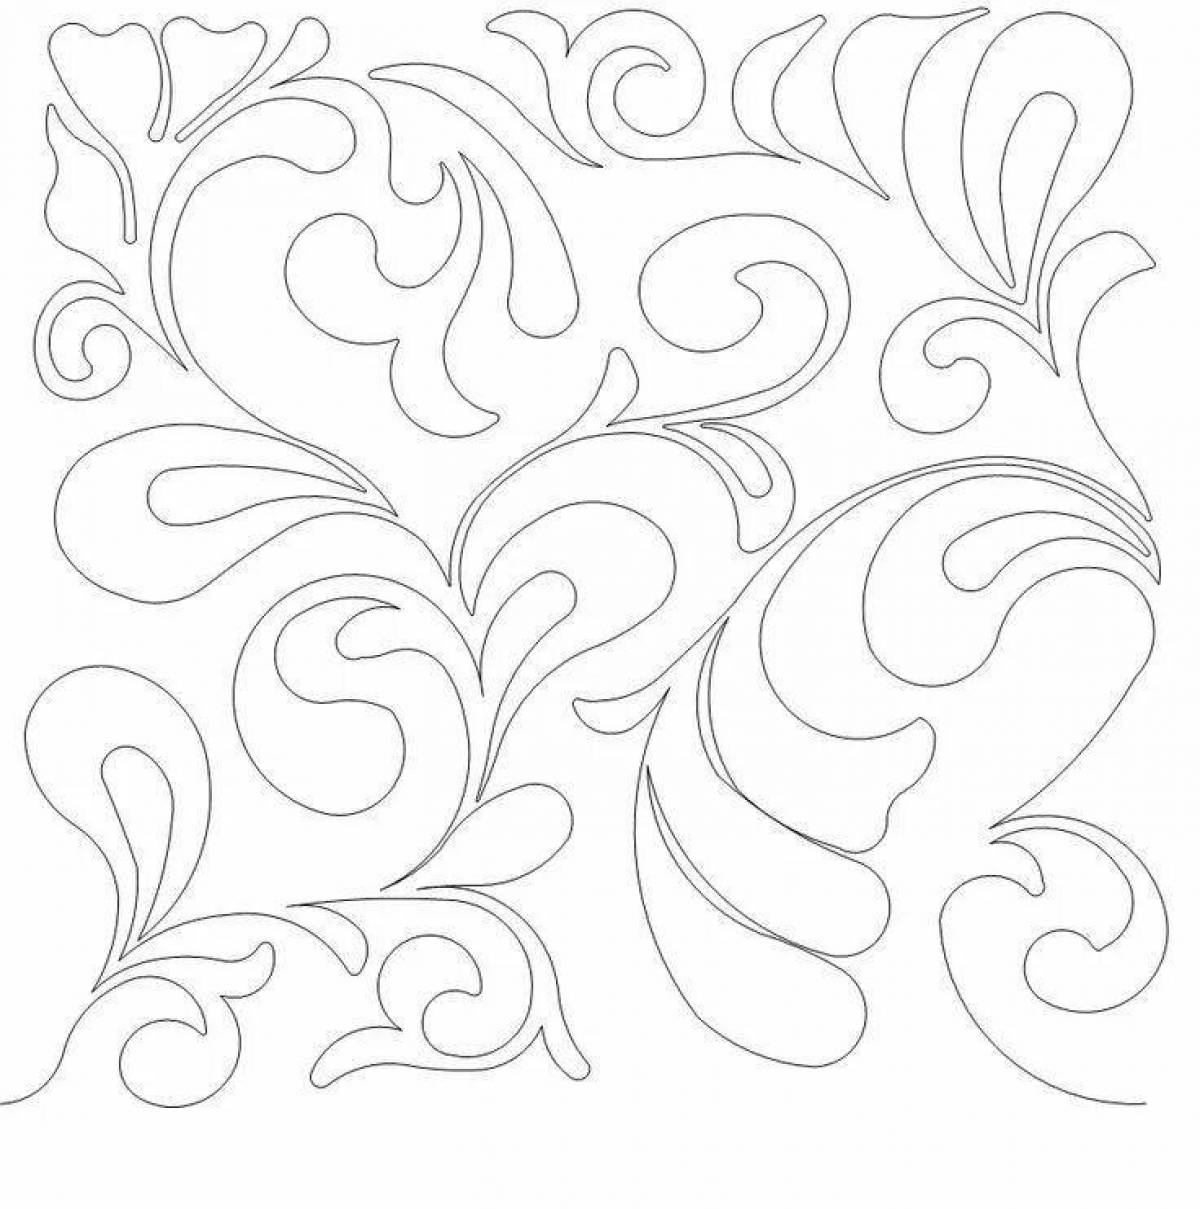 Fun coloring pages frosty patterns